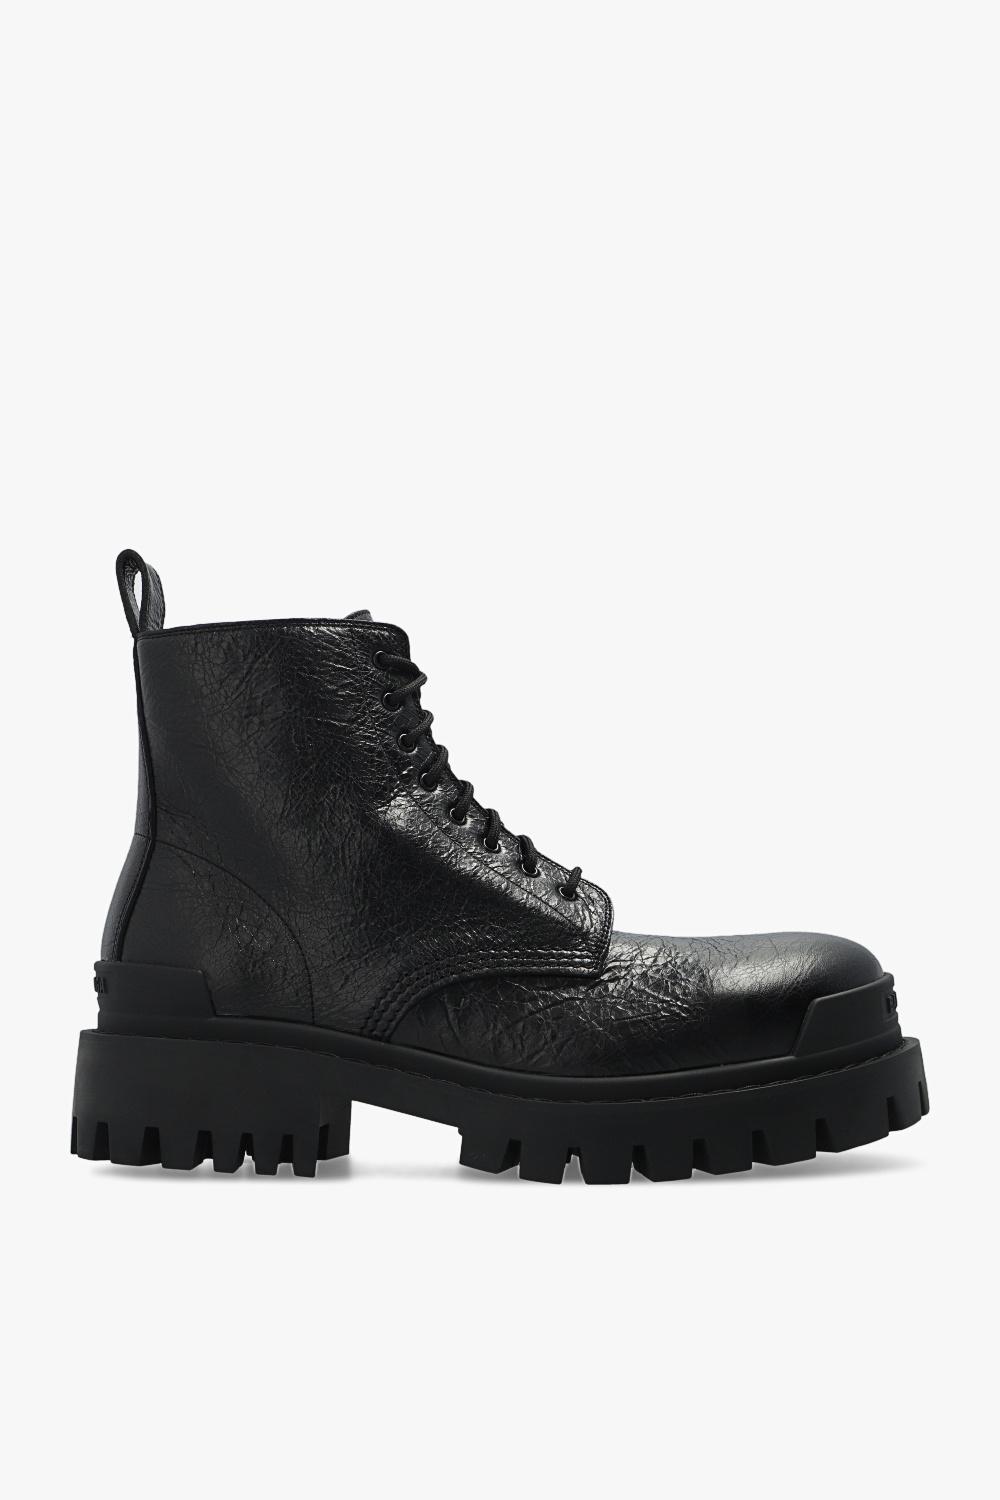 Balenciaga 'strike' Leather Shoes in Black for Men | Lyst